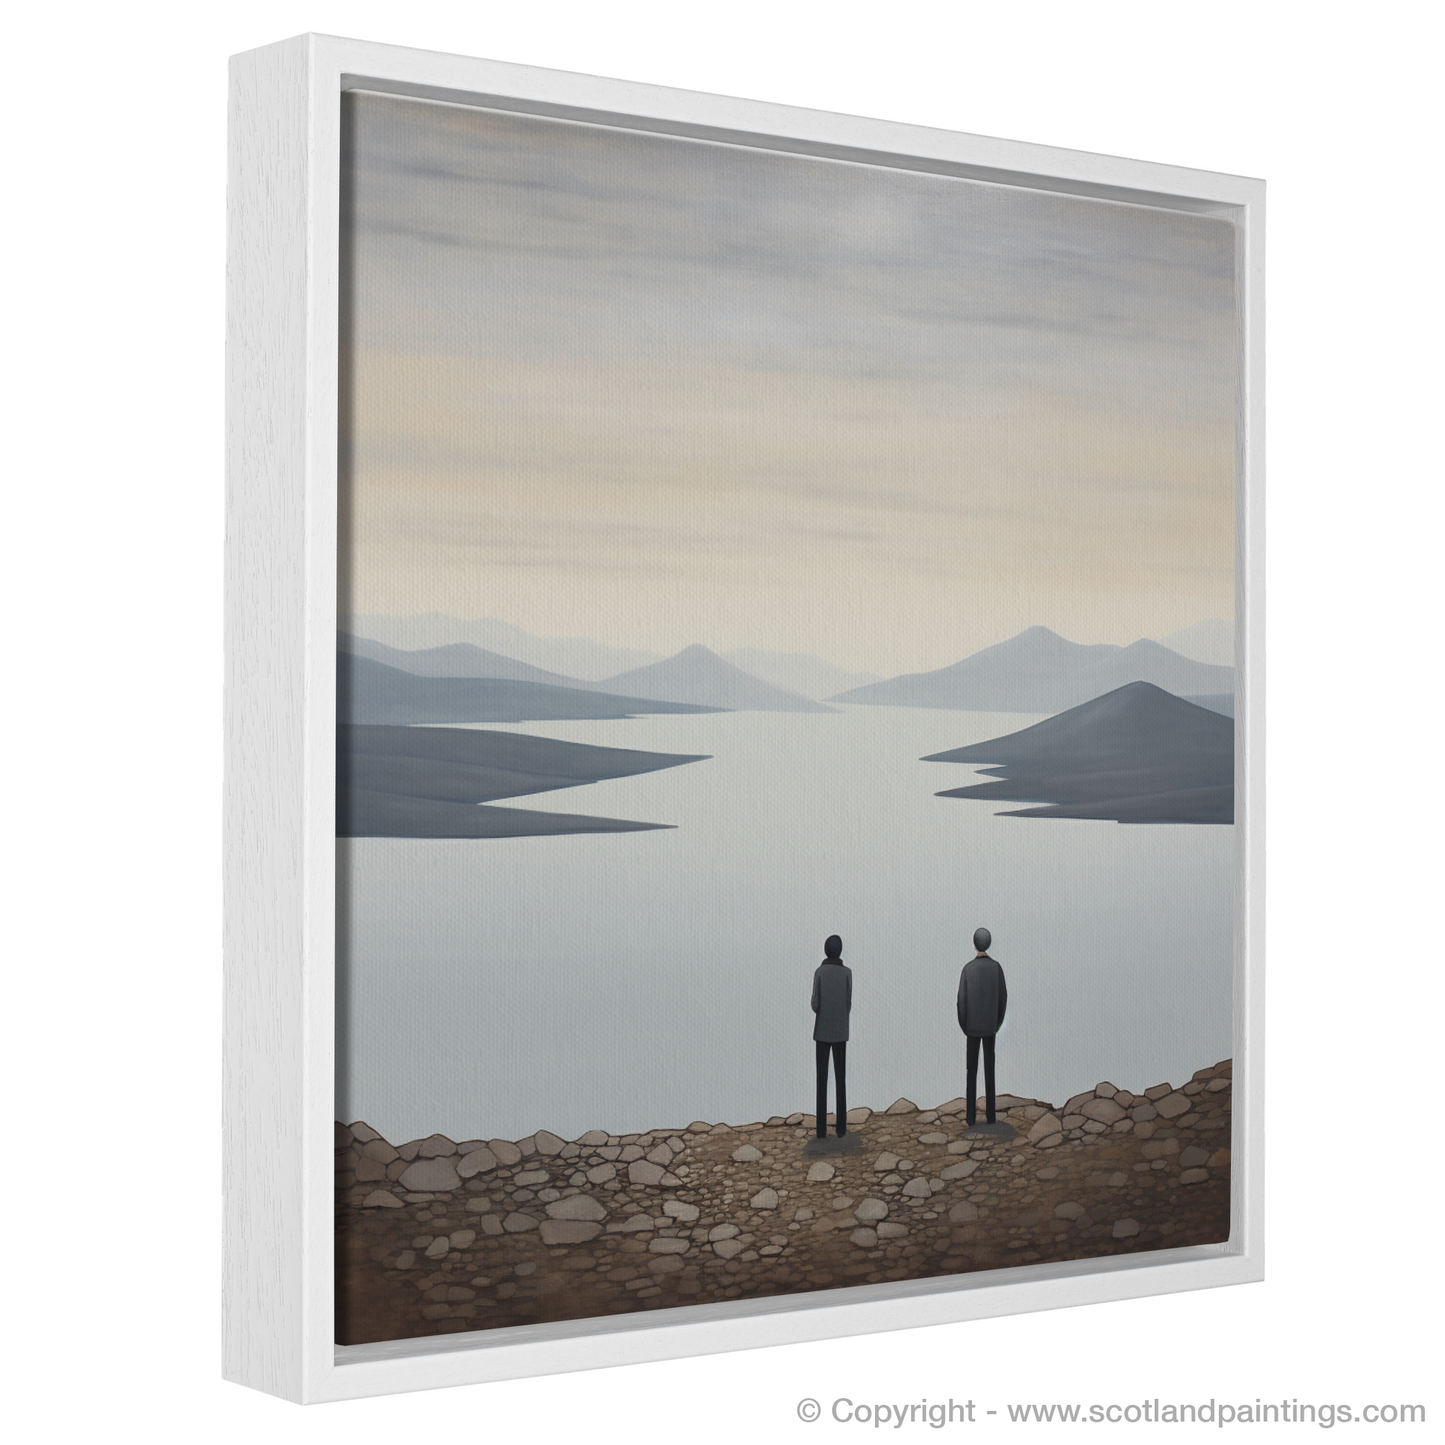 Painting and Art Print of Two hikers looking out on Loch Lomond entitled "Hikers' View: the Essence of Loch Lomond".